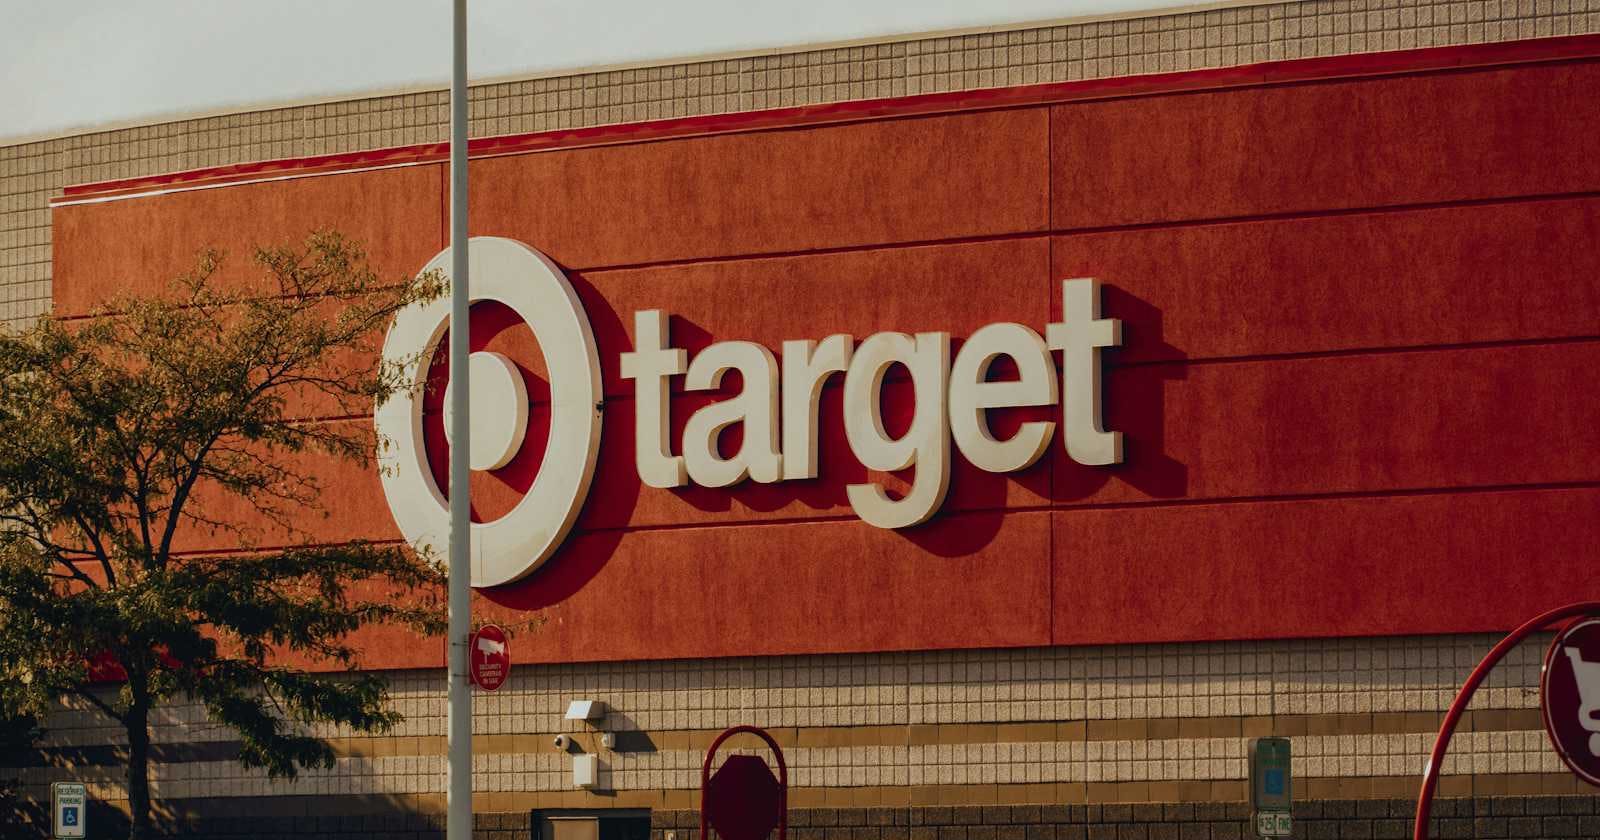 Target Data Breach: A Case Study in Cybersecurity Failures and Lessons Learned